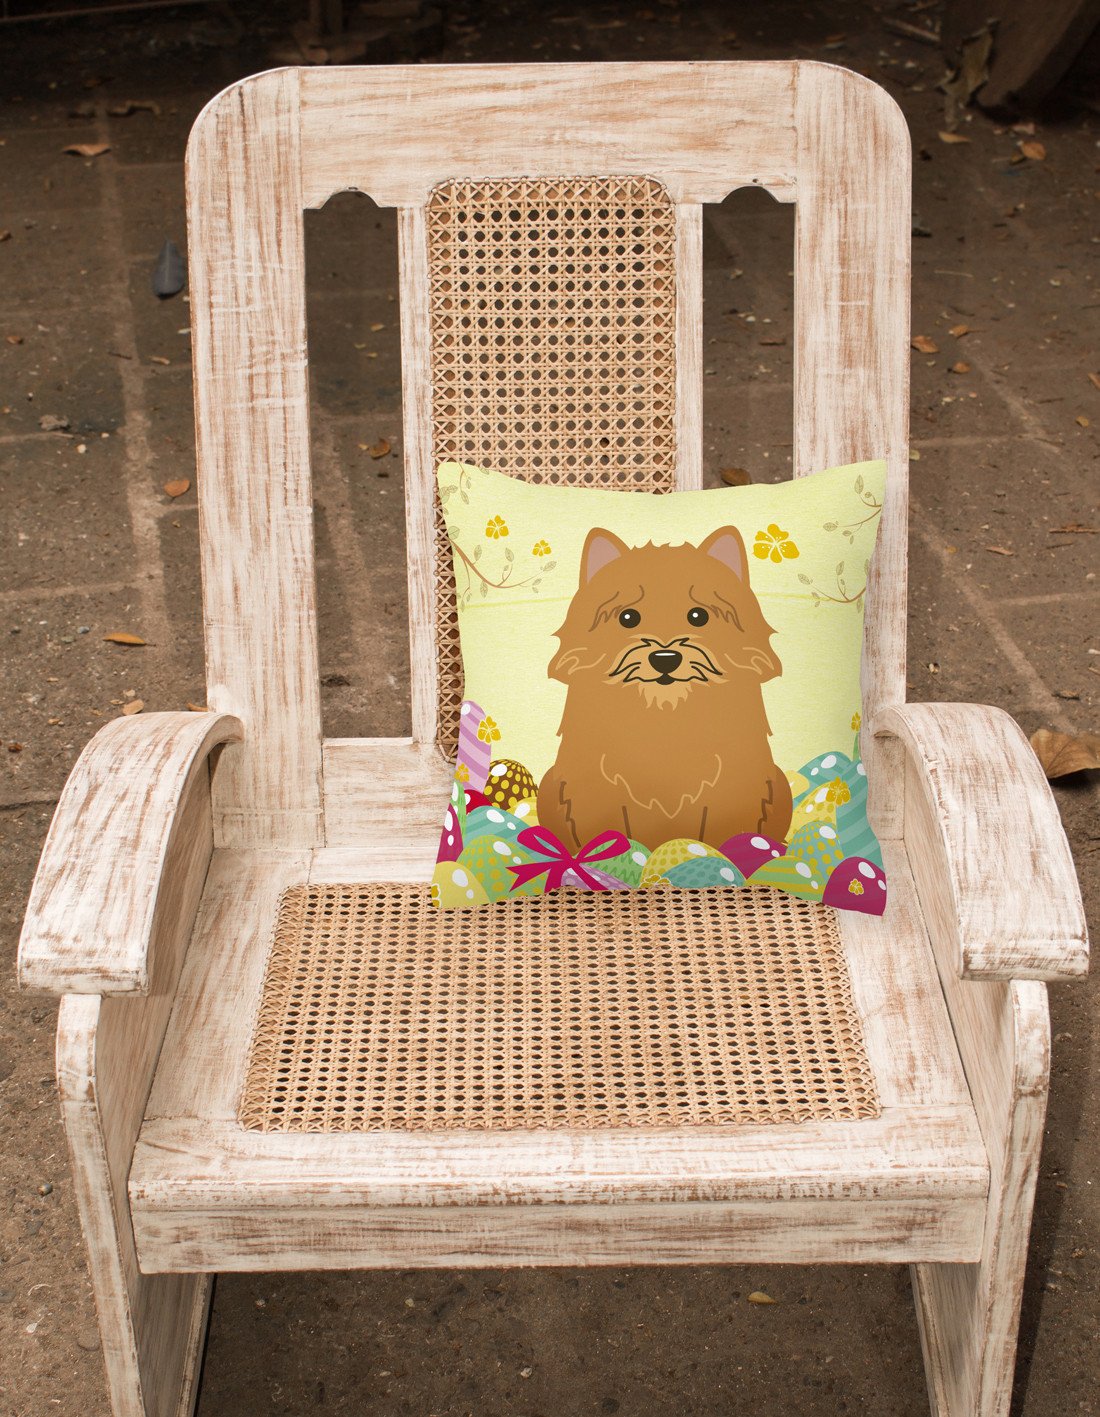 Easter Eggs Norwich Terrier Fabric Decorative Pillow BB6020PW1818 by Caroline's Treasures